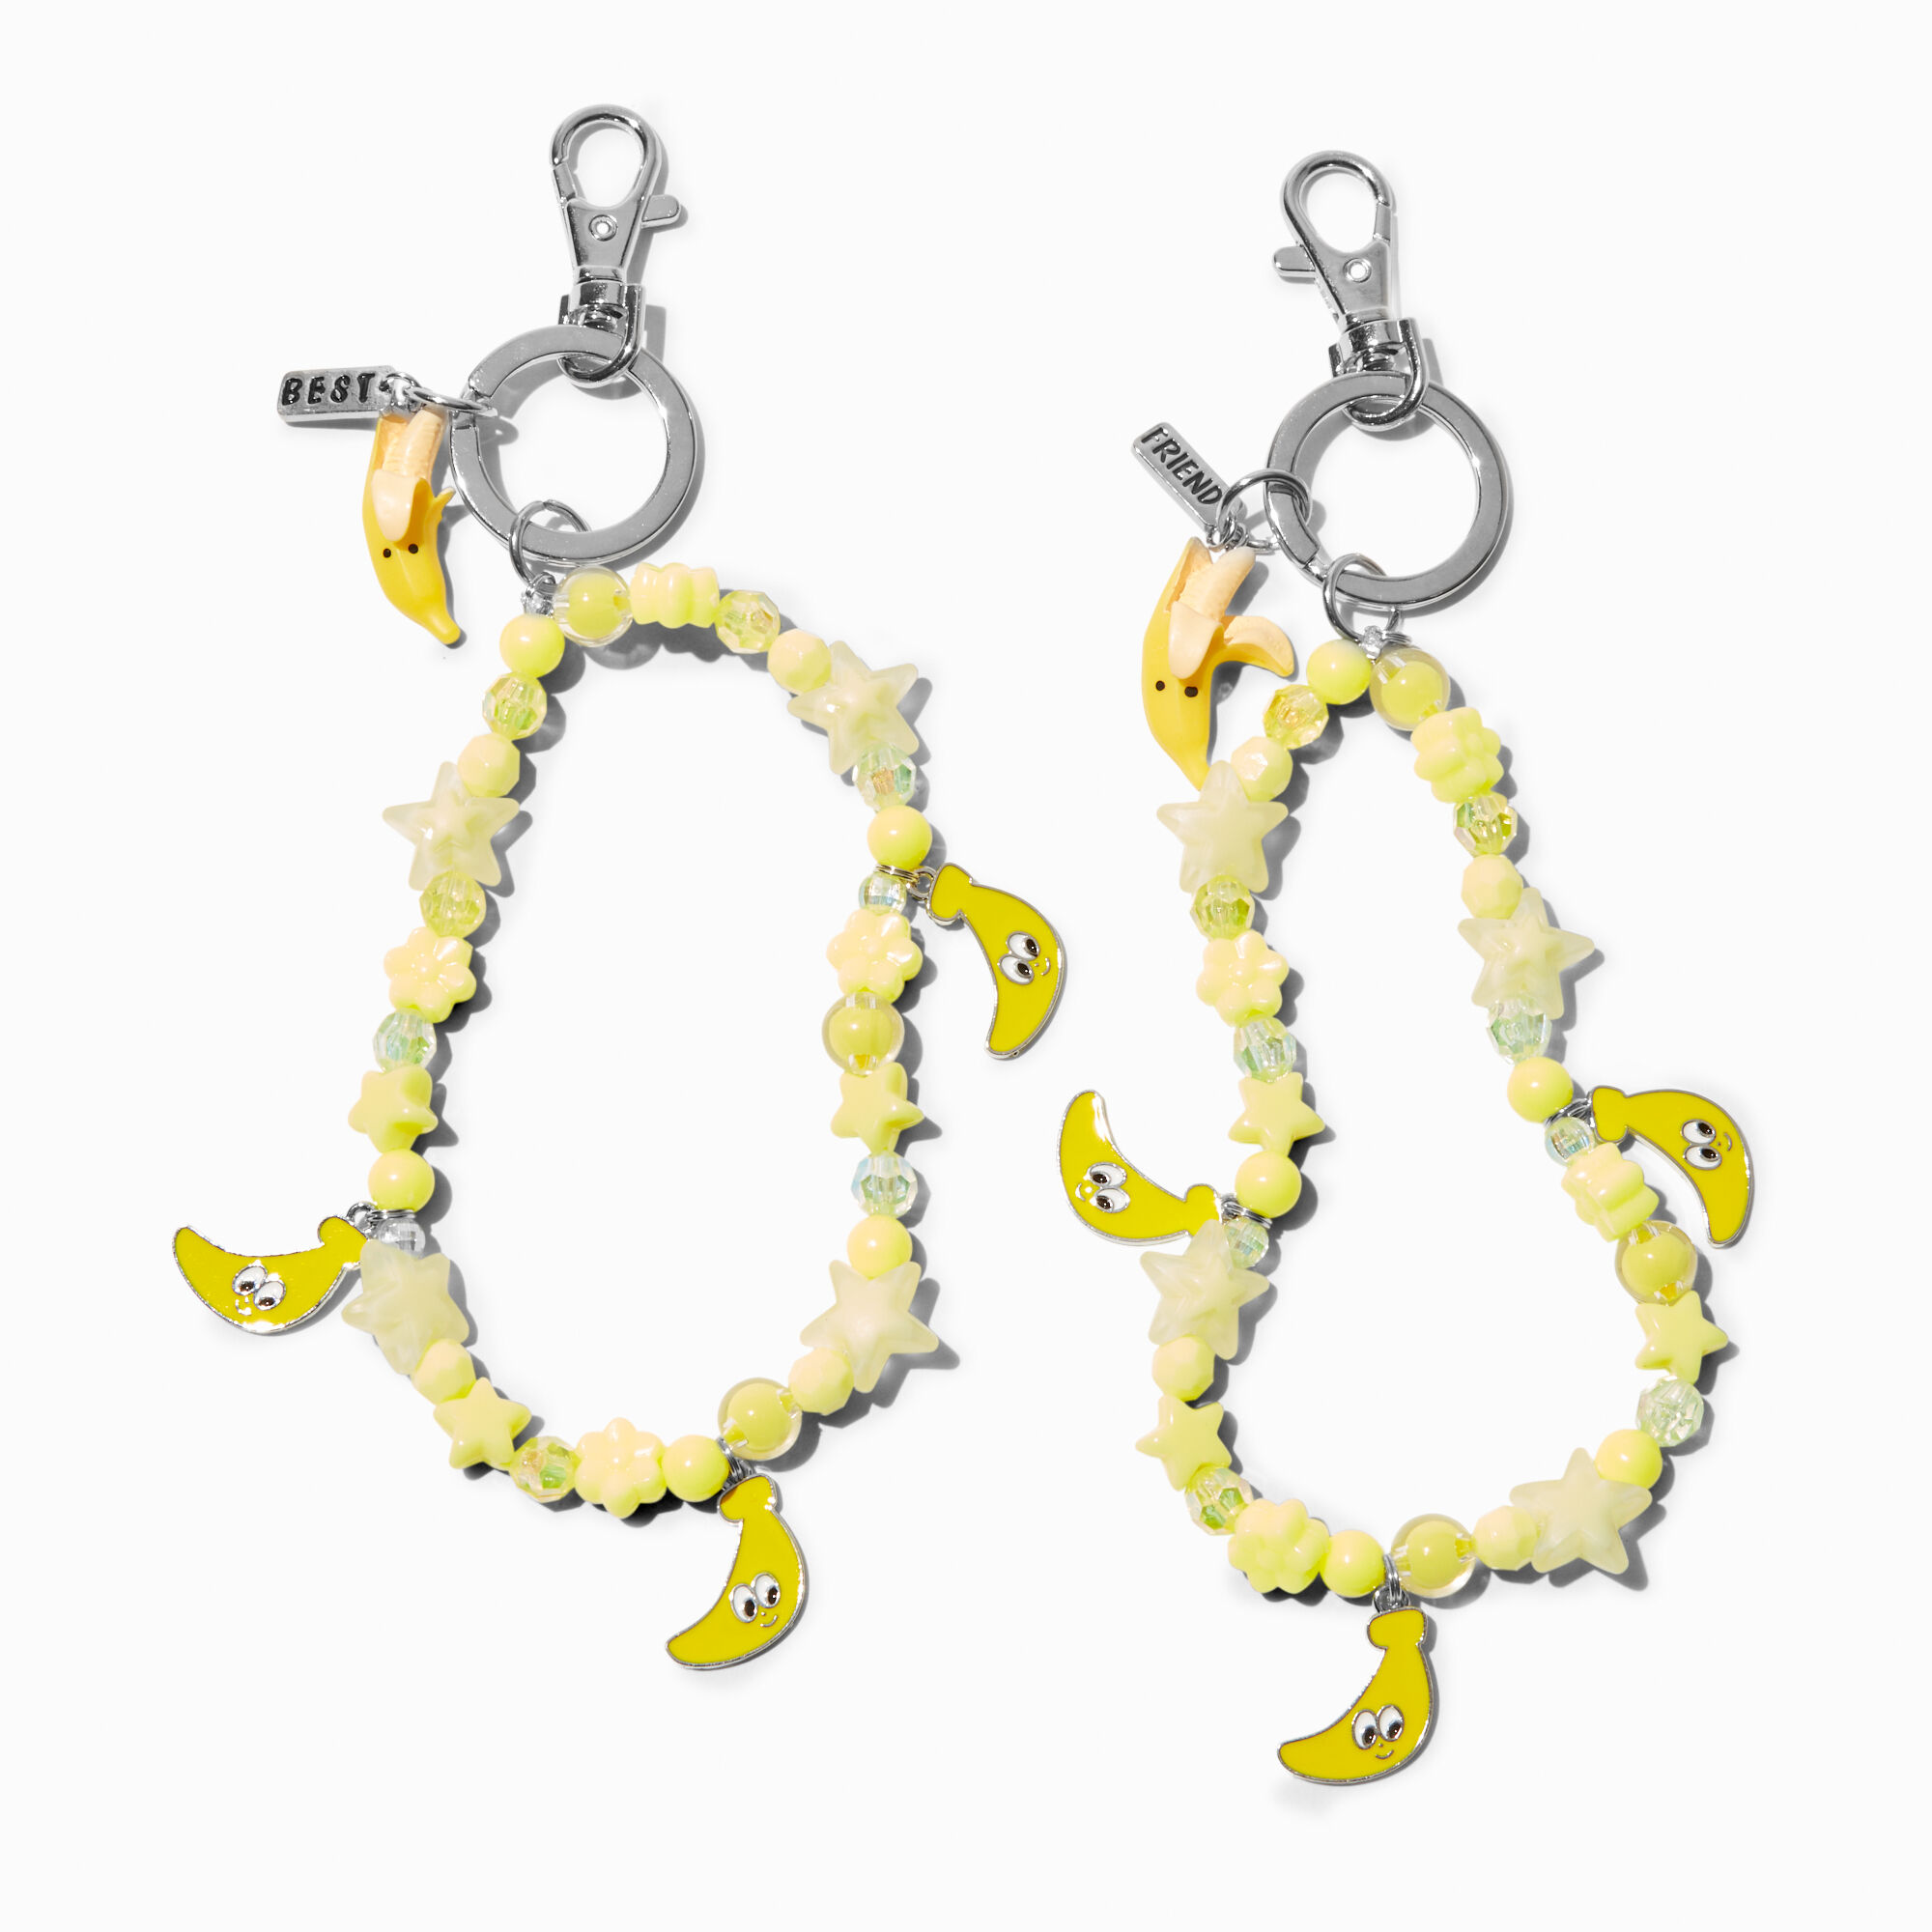 View Claires Best Friends Beaded Banana Wrislet Keyrings 2 Pack Silver information